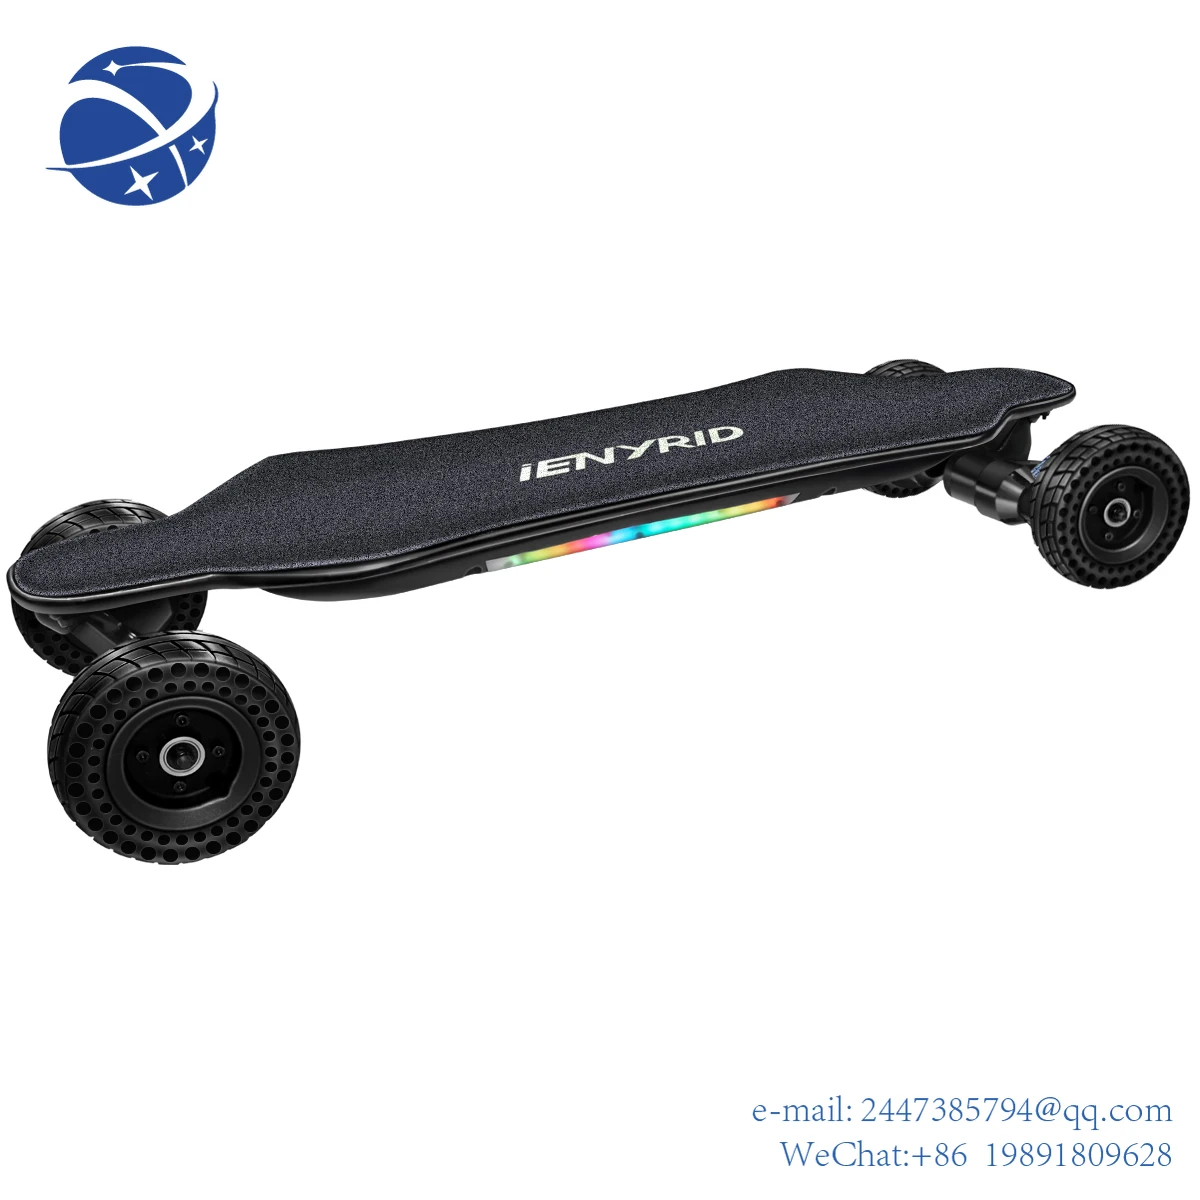 Yun YiUSA warehouse 4 wheel Electric SUV-skateboard Fast delivery time FCC ROHS CE electric skateboard is best 2019 factory price eec electric motorcycle fast delivery electric scooter custom